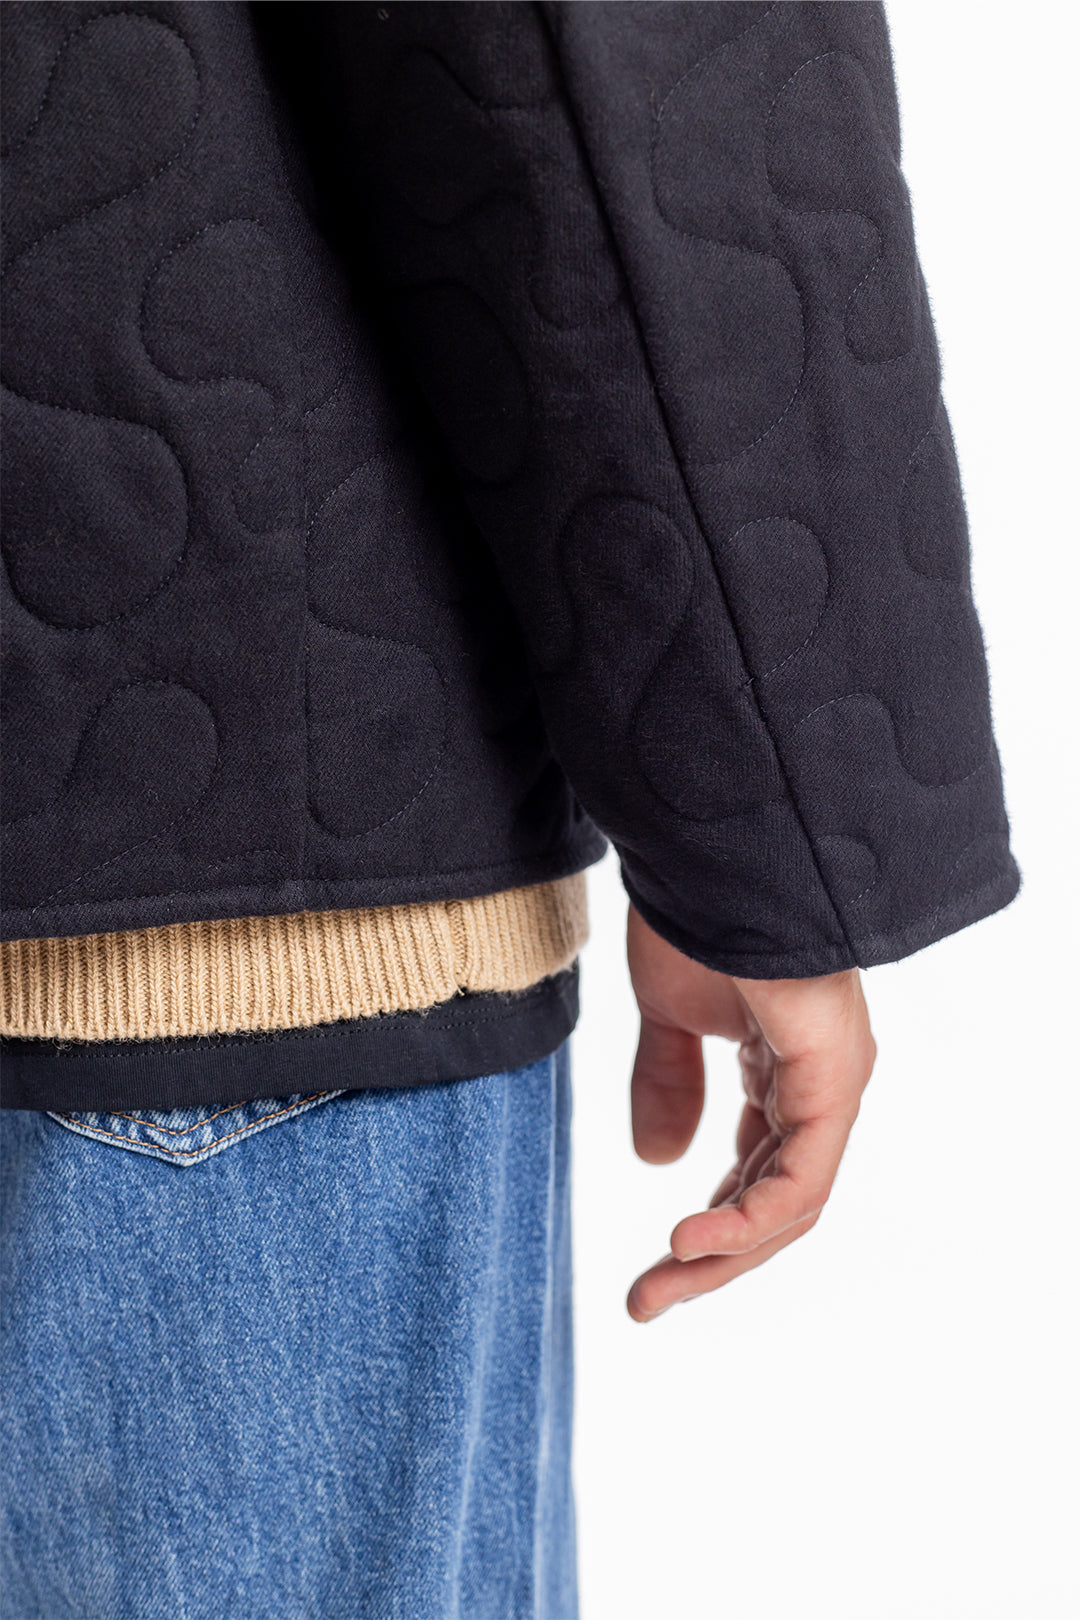 Black, quilted jacket made of organic cotton &amp; recycled PET from Rotholz